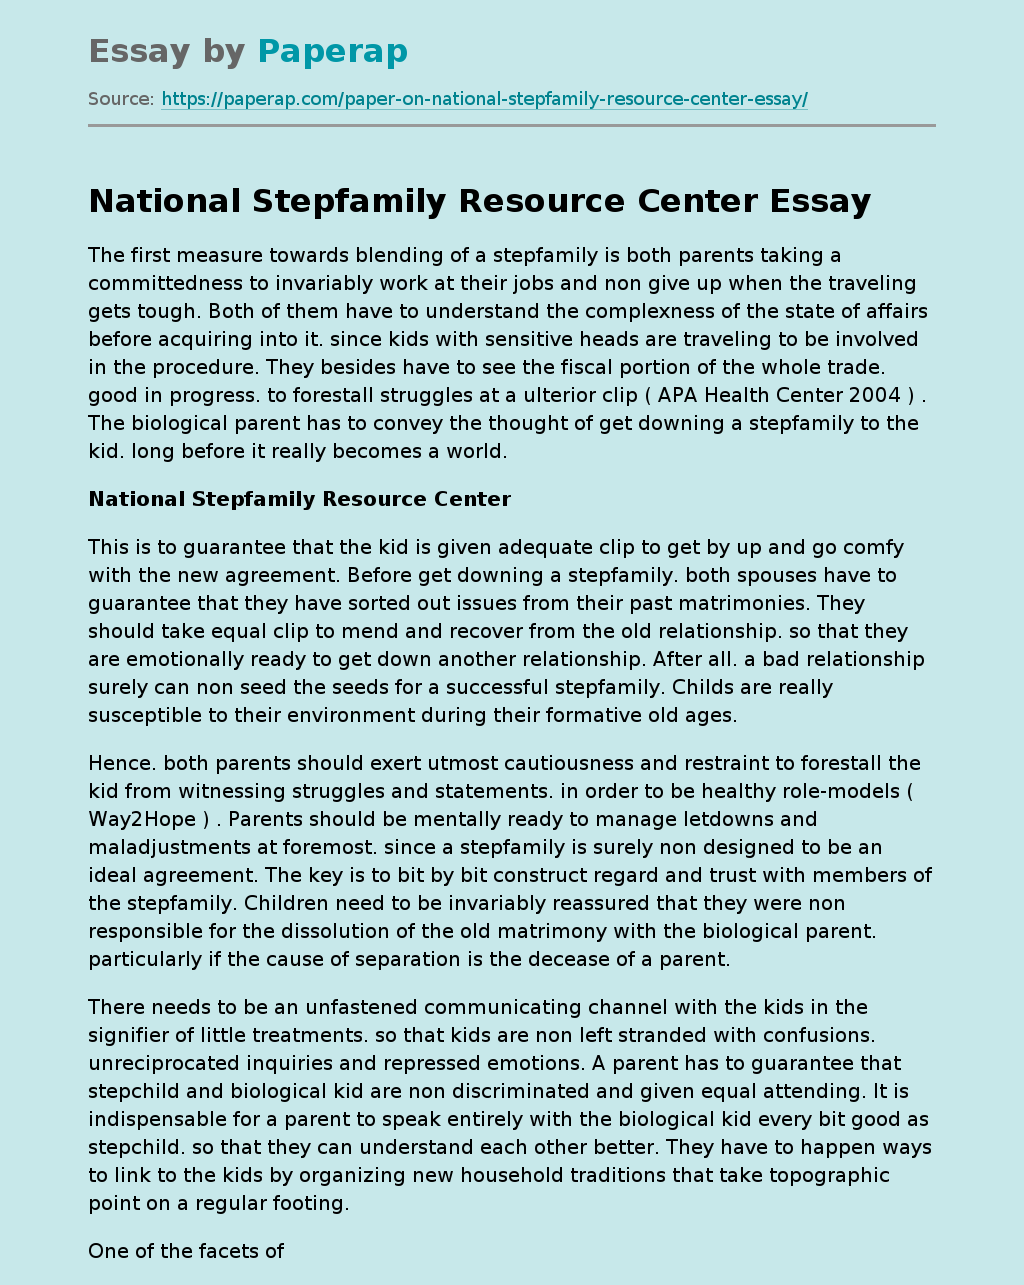 National Stepfamily Resource Center